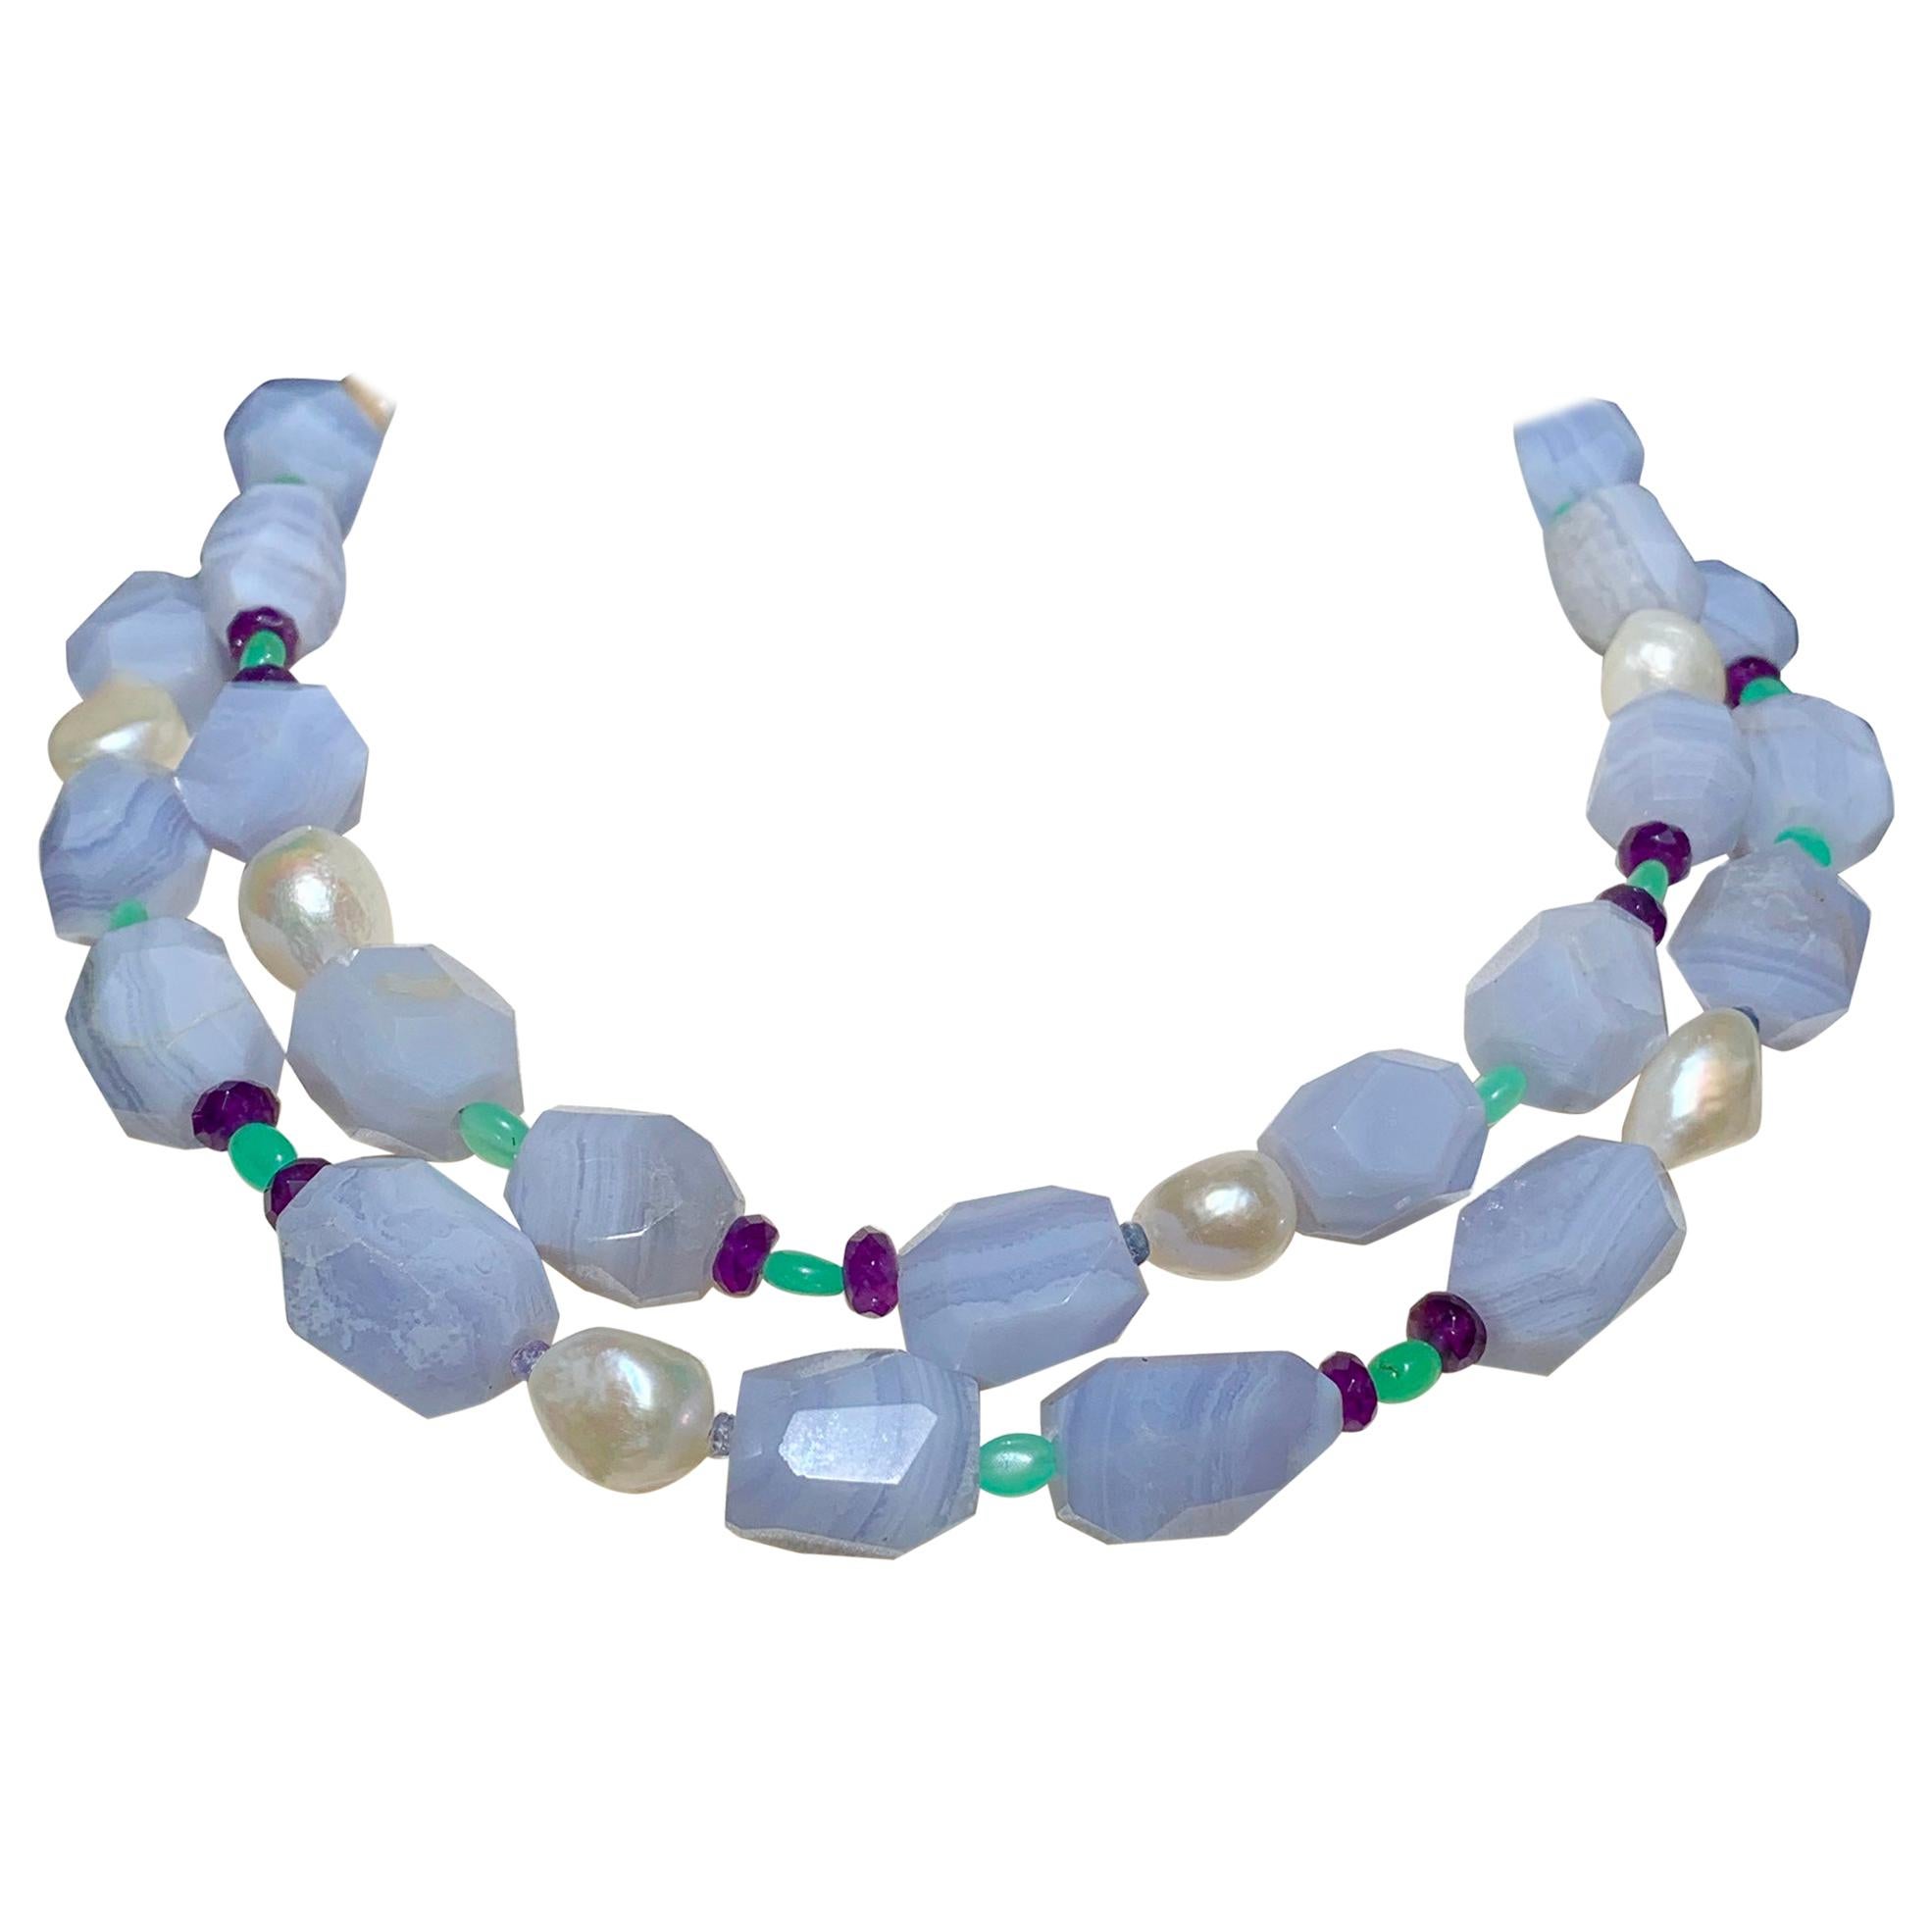  36" Blue Lace Agate Necklace/Blue Chalcedony with Chrysoprase and Amethyst